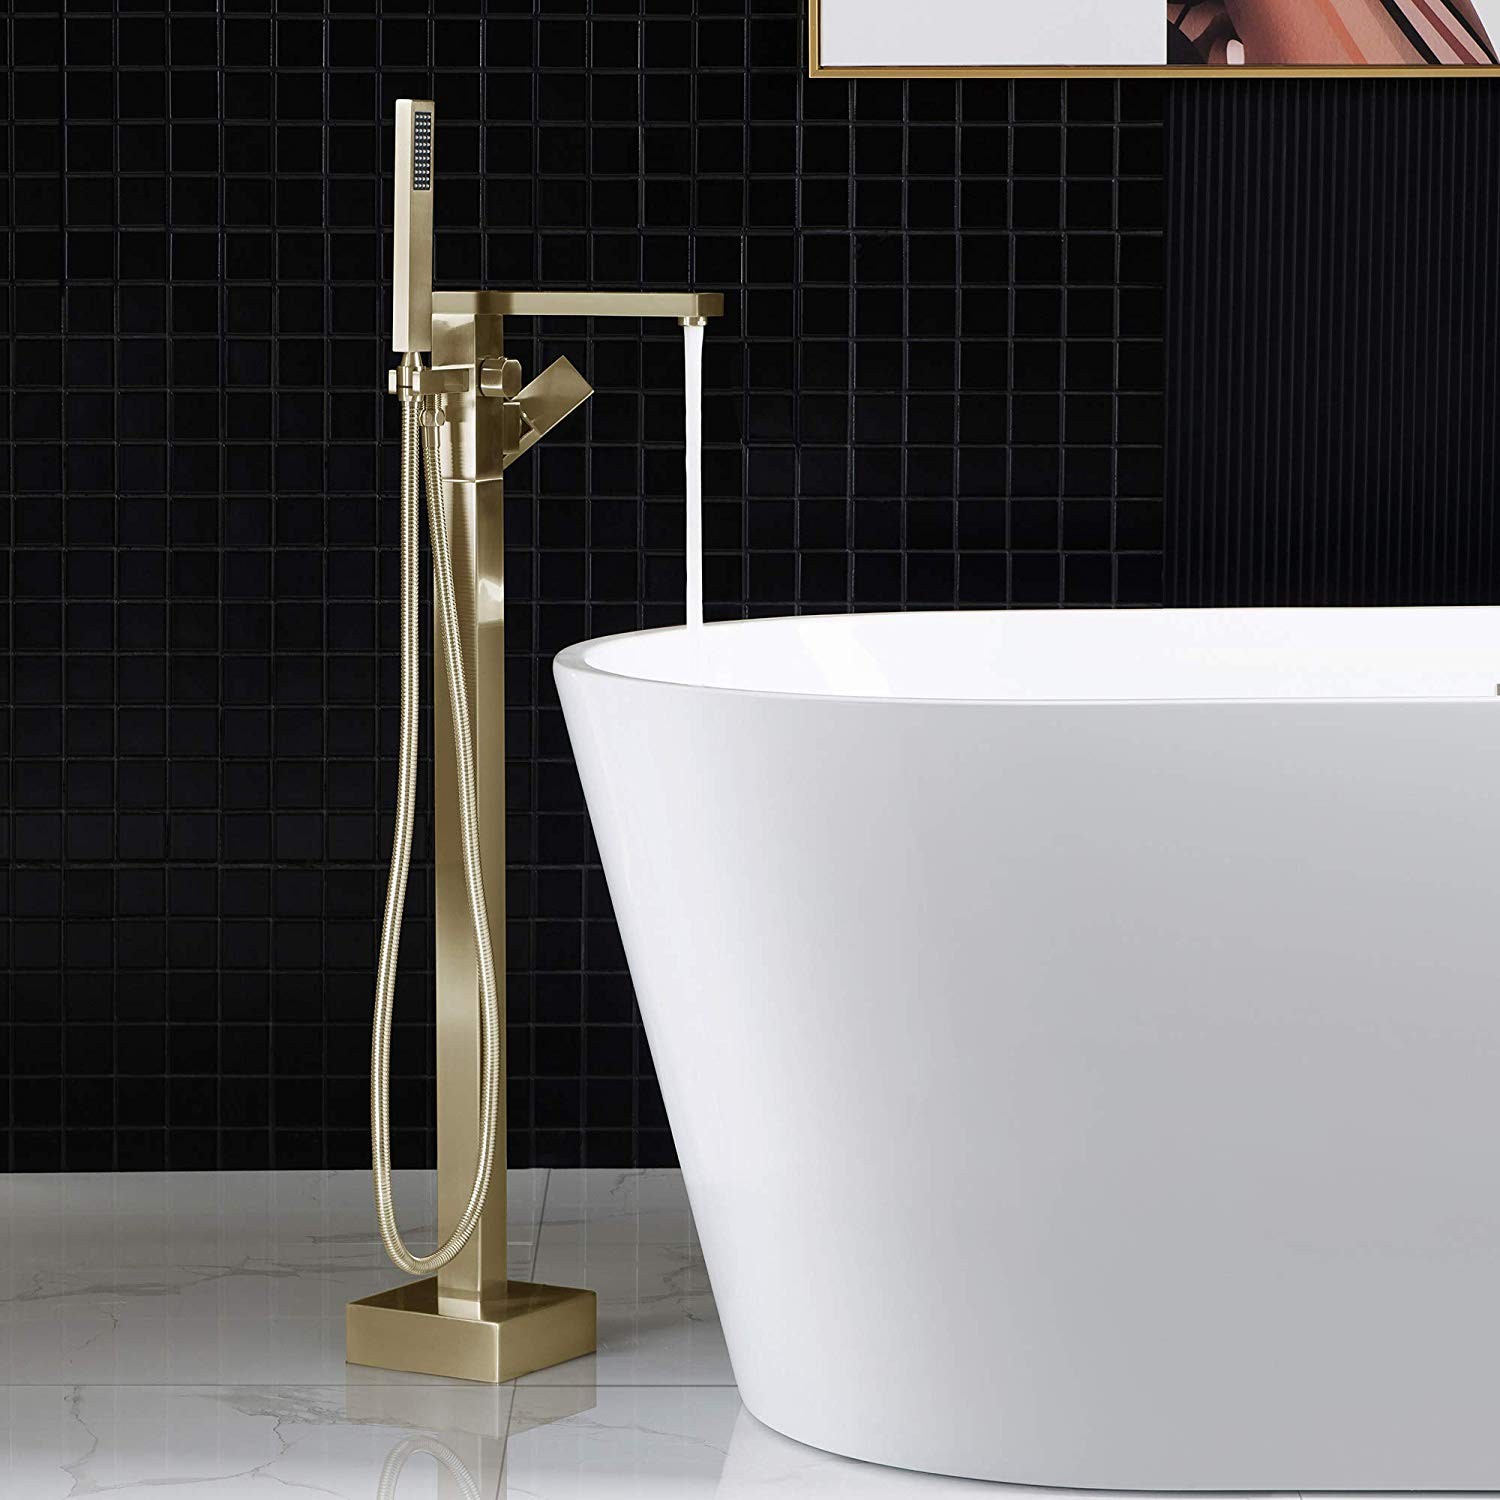  WOODBRIDGE F0008BG Contemporary Single Handle Floor Mount Freestanding Tub Filler Faucet with Hand shower in Brushed Gold Finish._10001